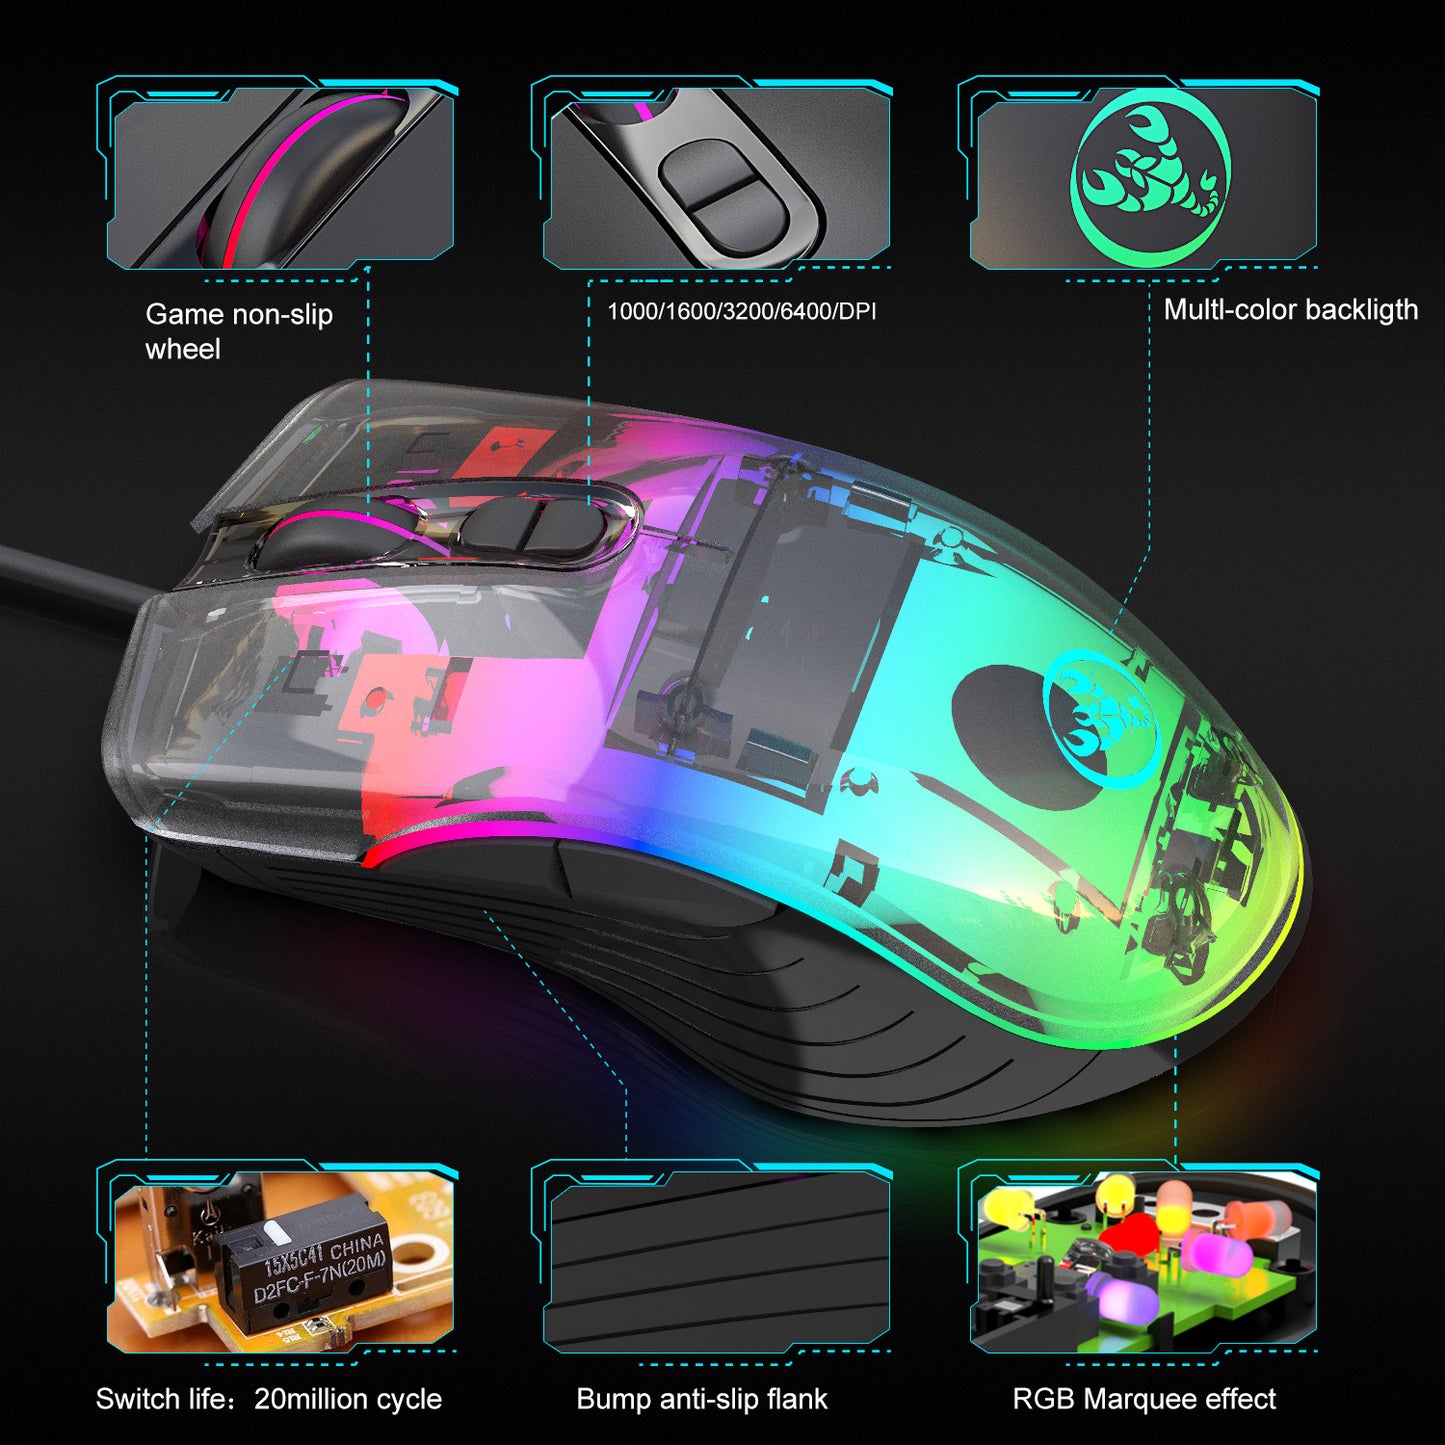 RGB Light 3200DPI Macro Programmable 7 Button Optical USB Wired Mouse